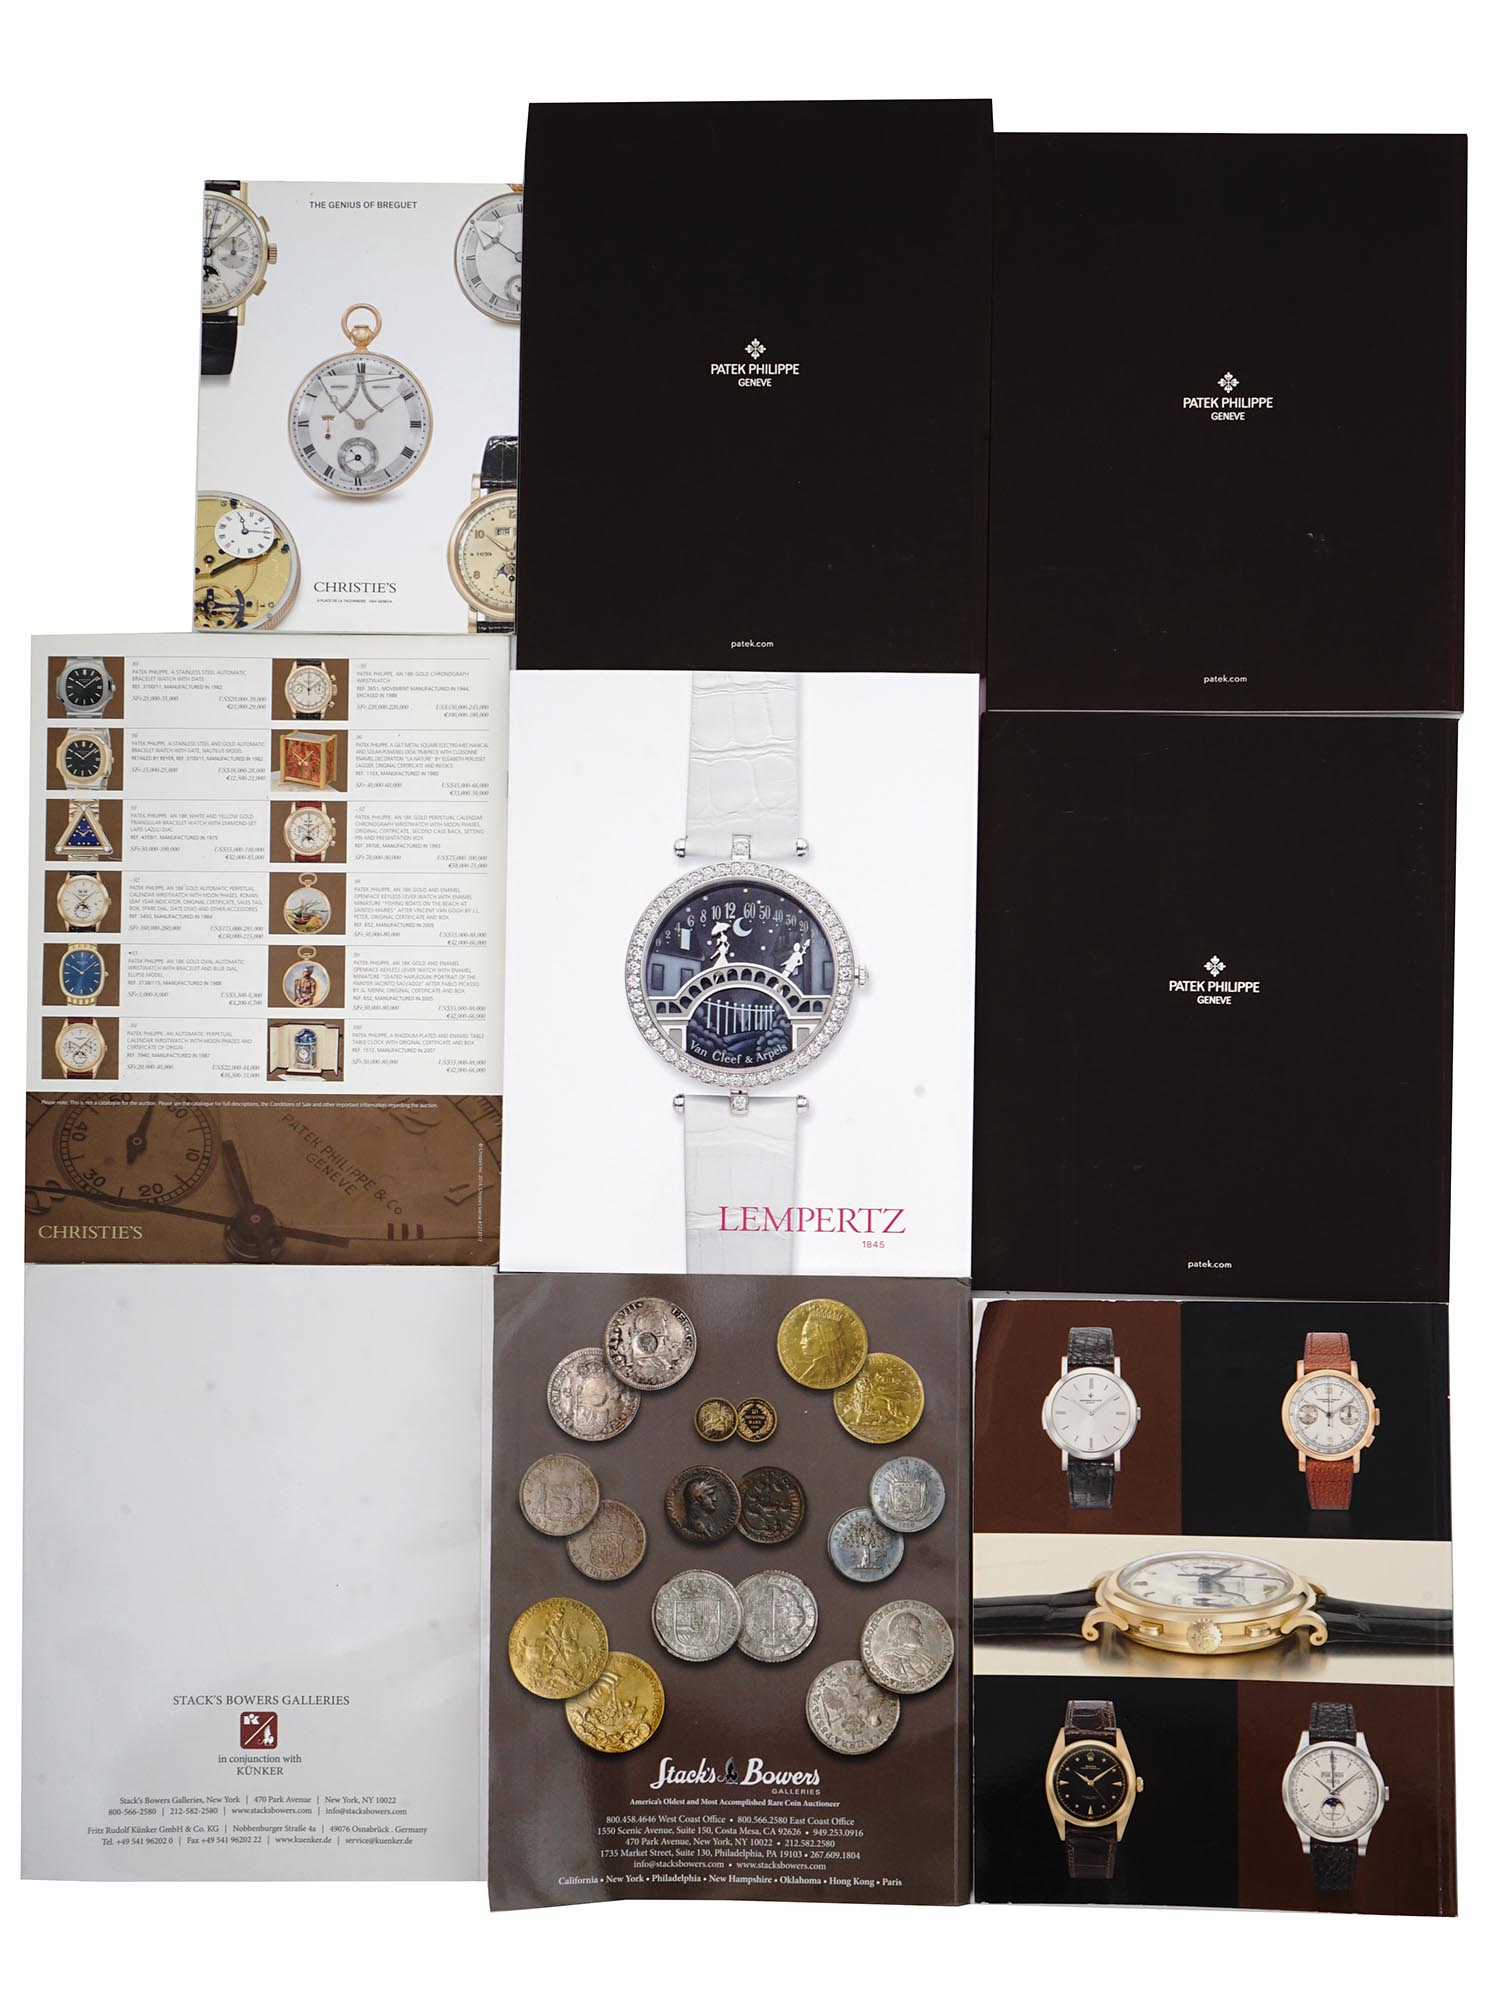 COLLECTION OF JEWELRY WARES COIN AUCTION CATALOGS PIC-2